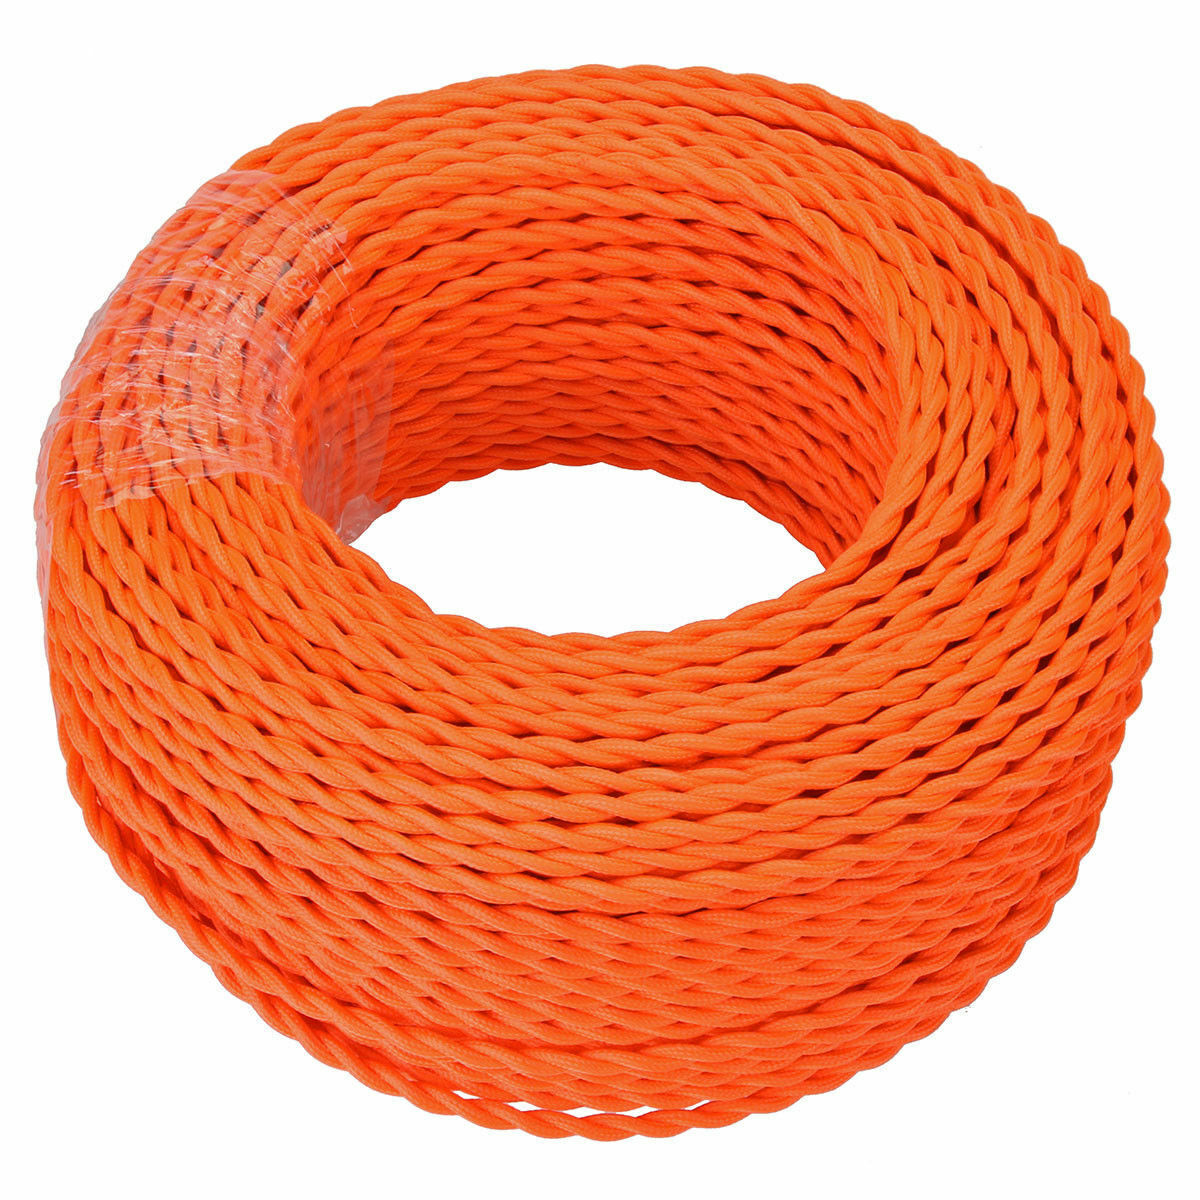 18 Gauge 3 Conductor Twisted Cloth Covered Wire Braided Light Cord Orange~1362-2